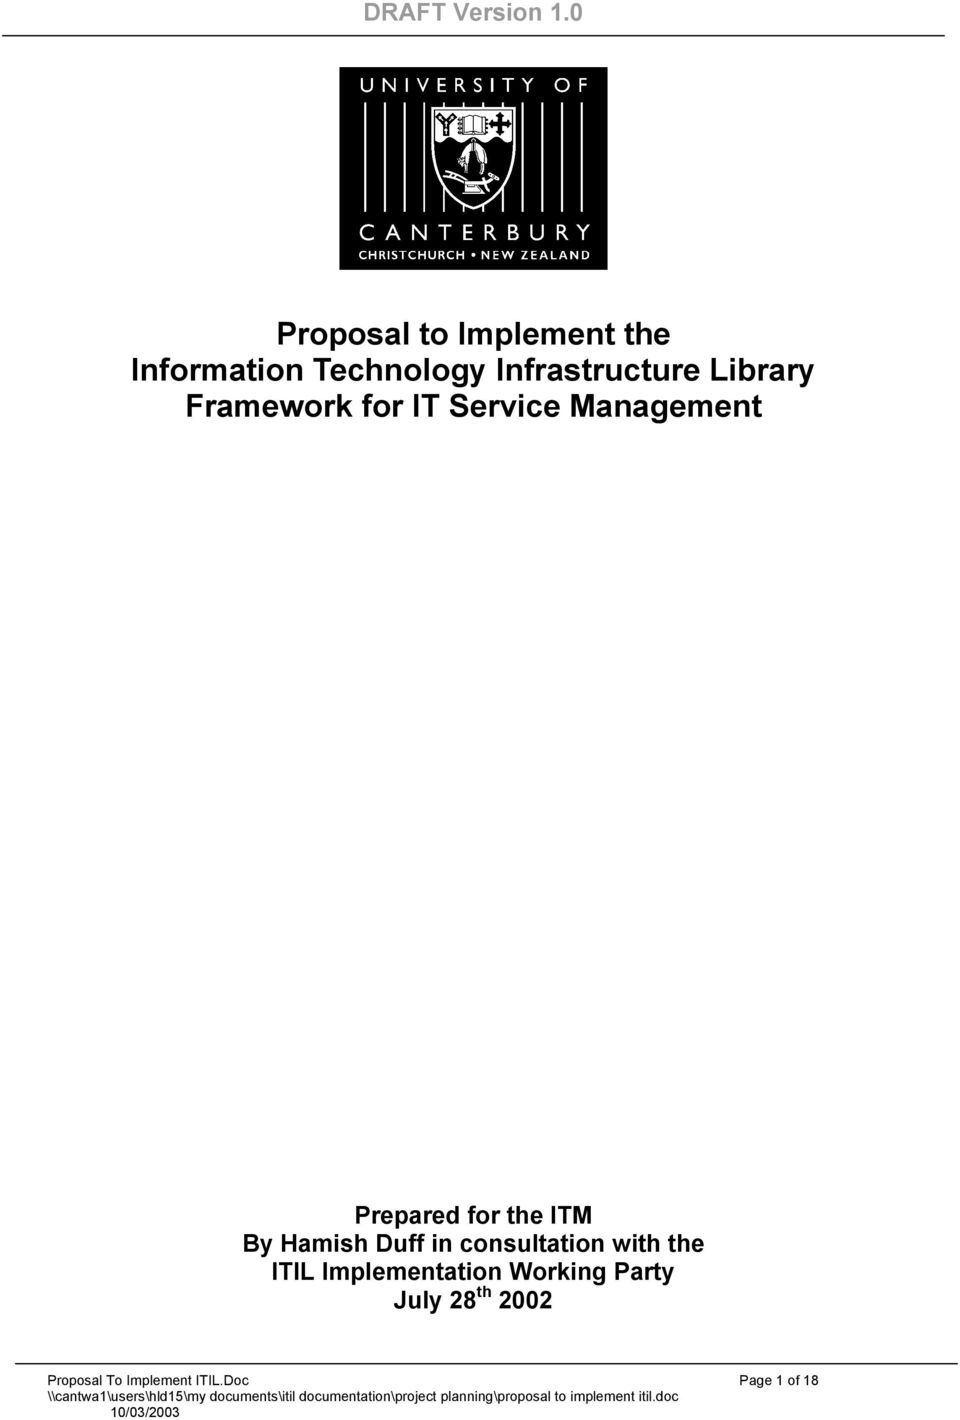 By Hamish Duff in consultation with the ITIL Implementation